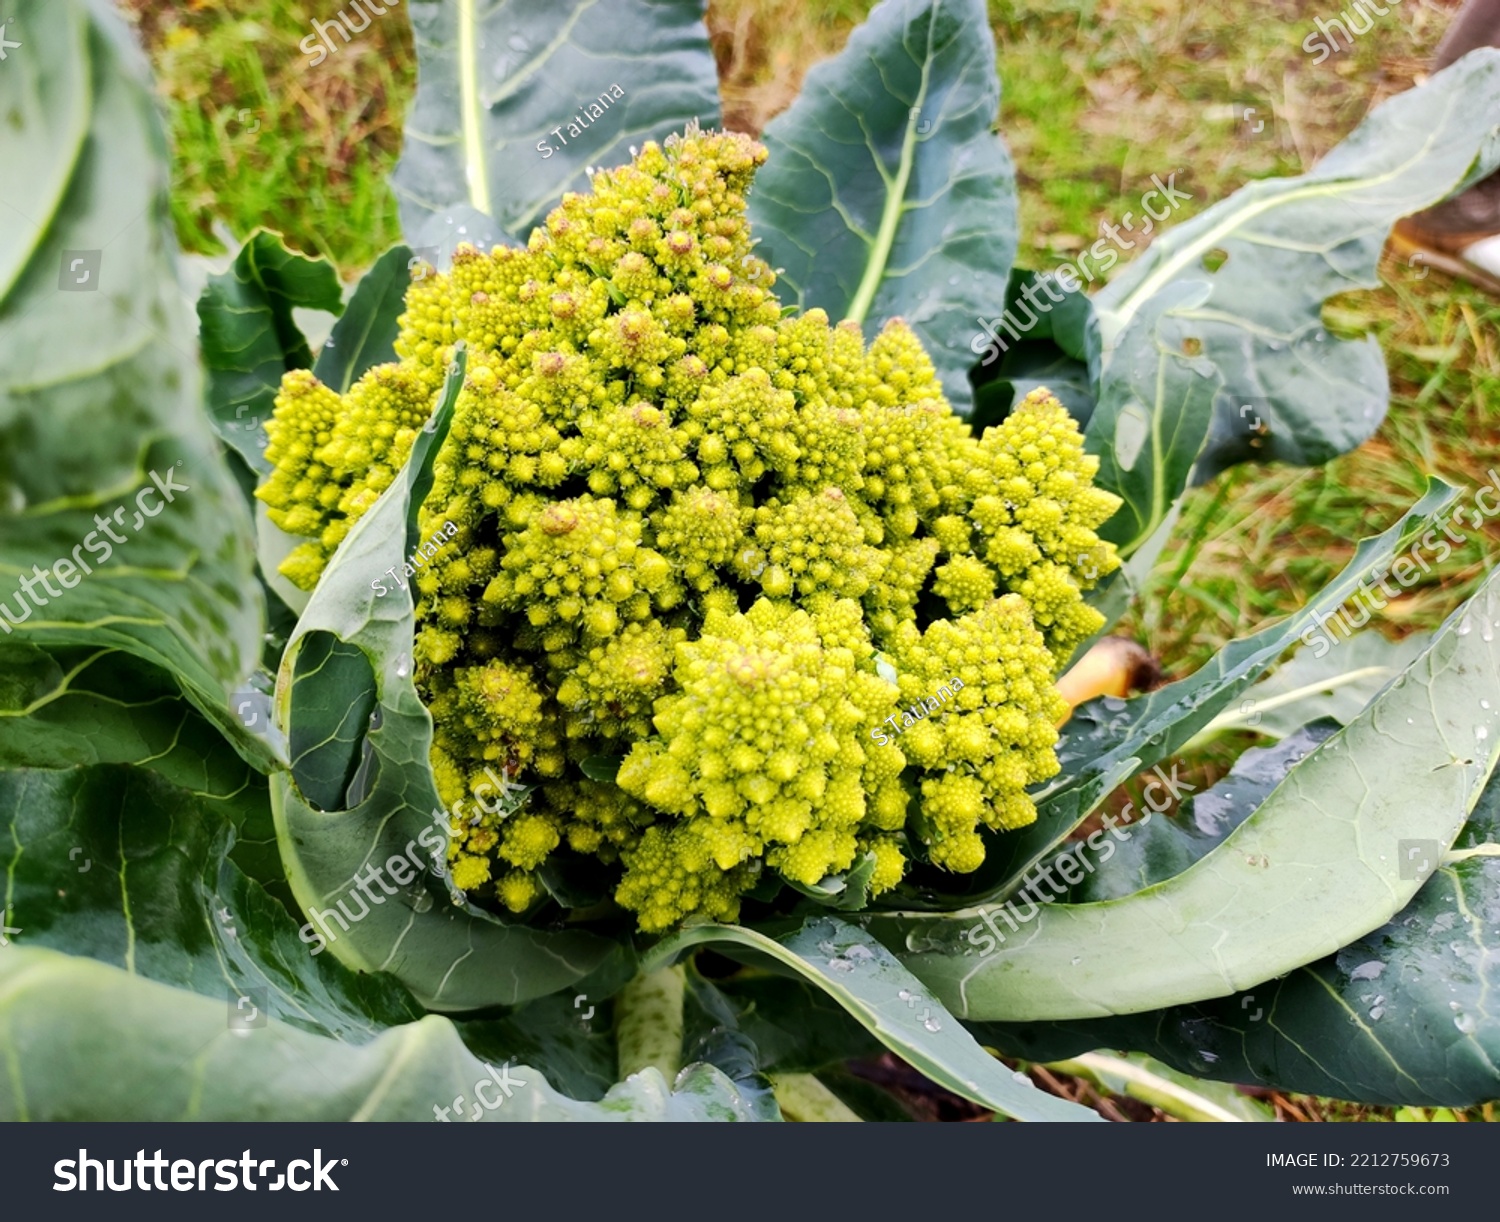 Romanesco cabbage. Brassica oleracea Botrytis Group 'Romanesco'. Brassica cretica. Cretan cabbage. Romanesco in the garden. Roman cabbage. Cauliflower and broccoli. Cabbage in the form of a spiral #2212759673